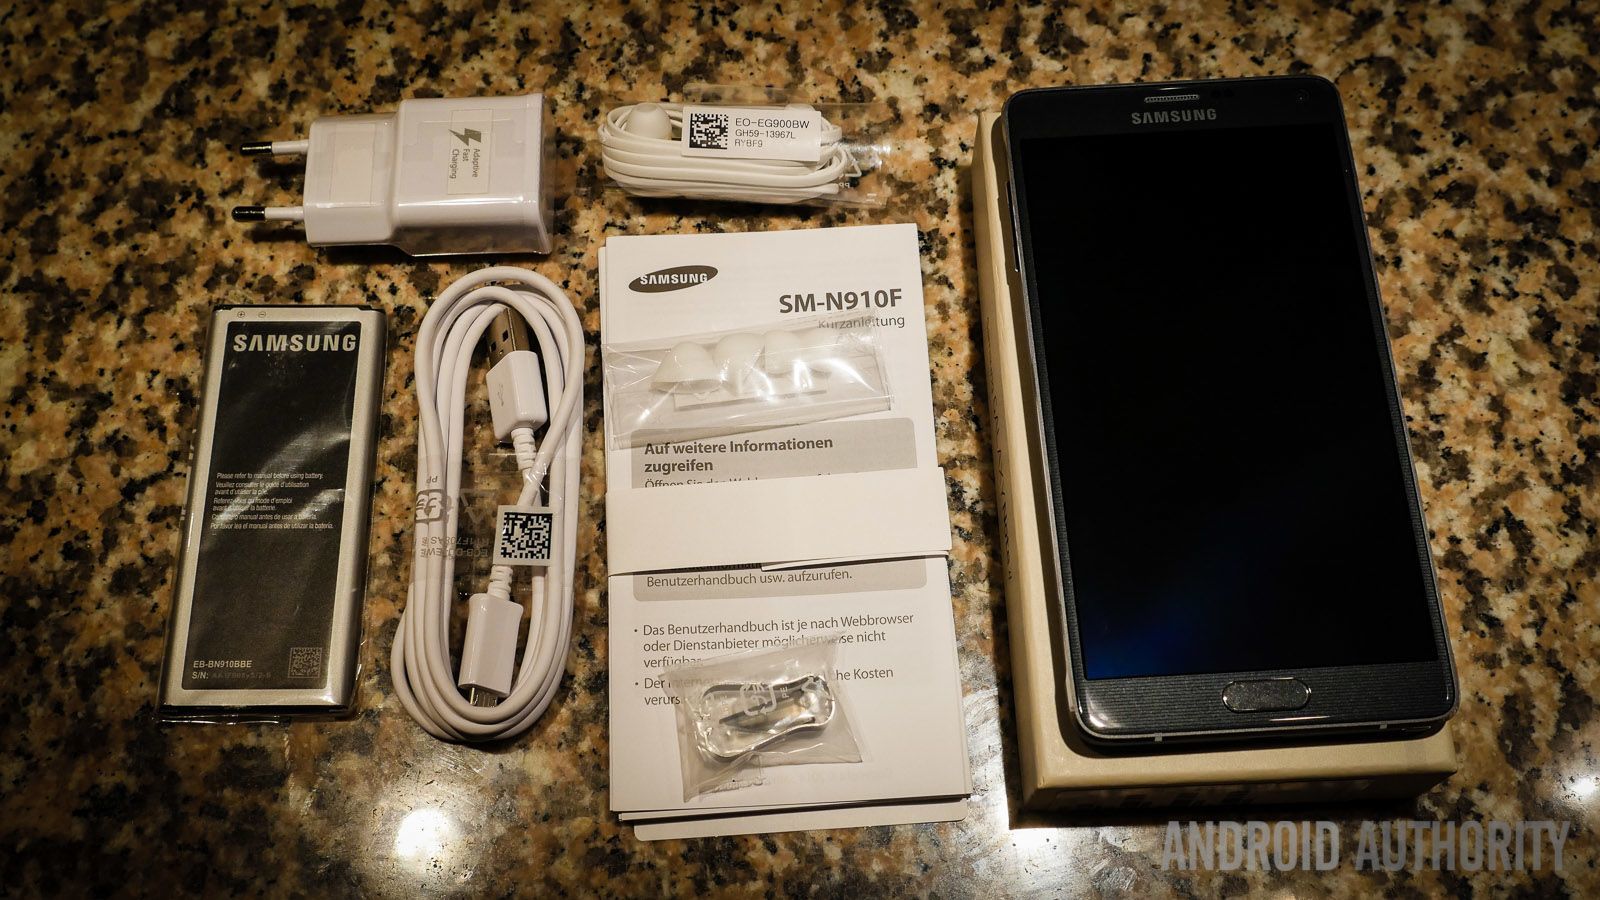 Samsung Galaxy Note 4 and